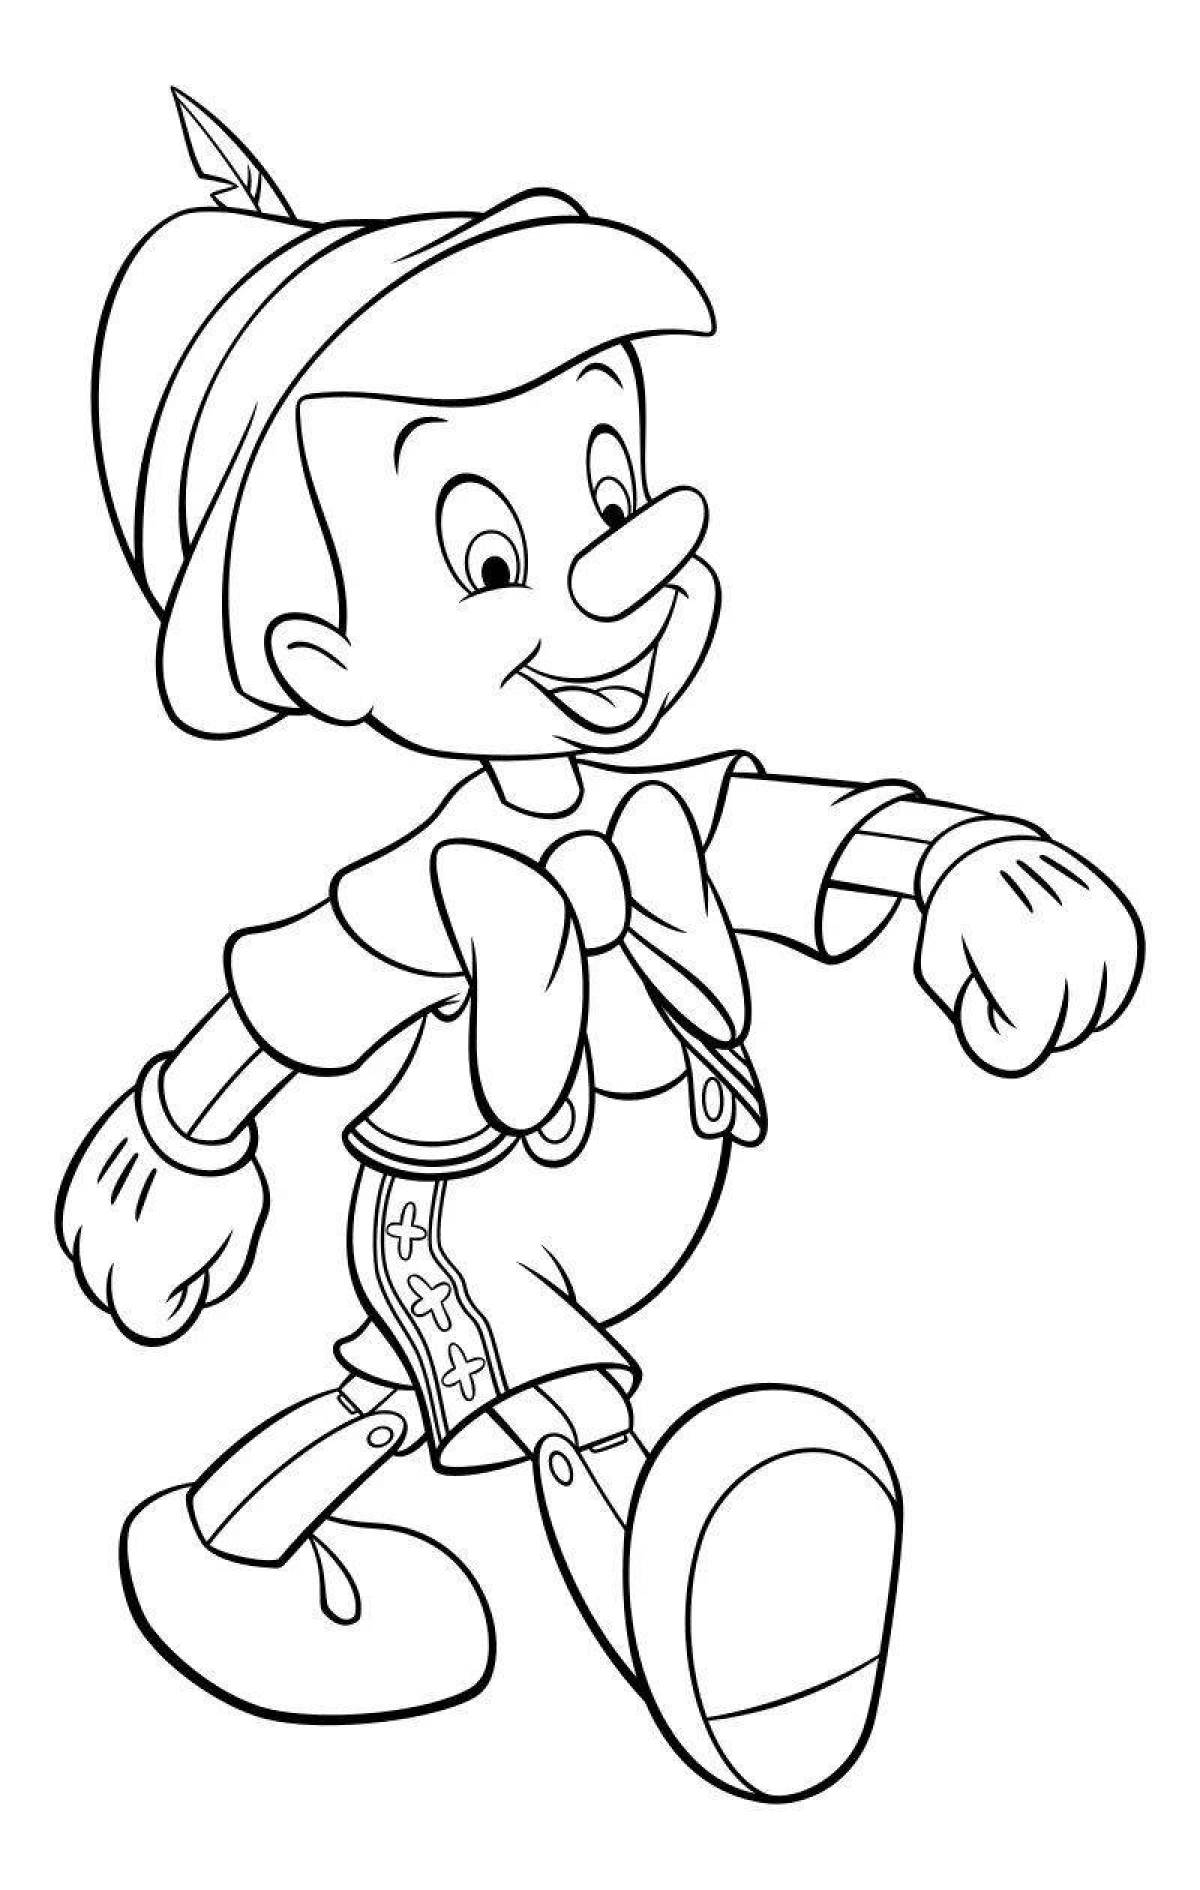 Colorful pinocchio coloring book for kids